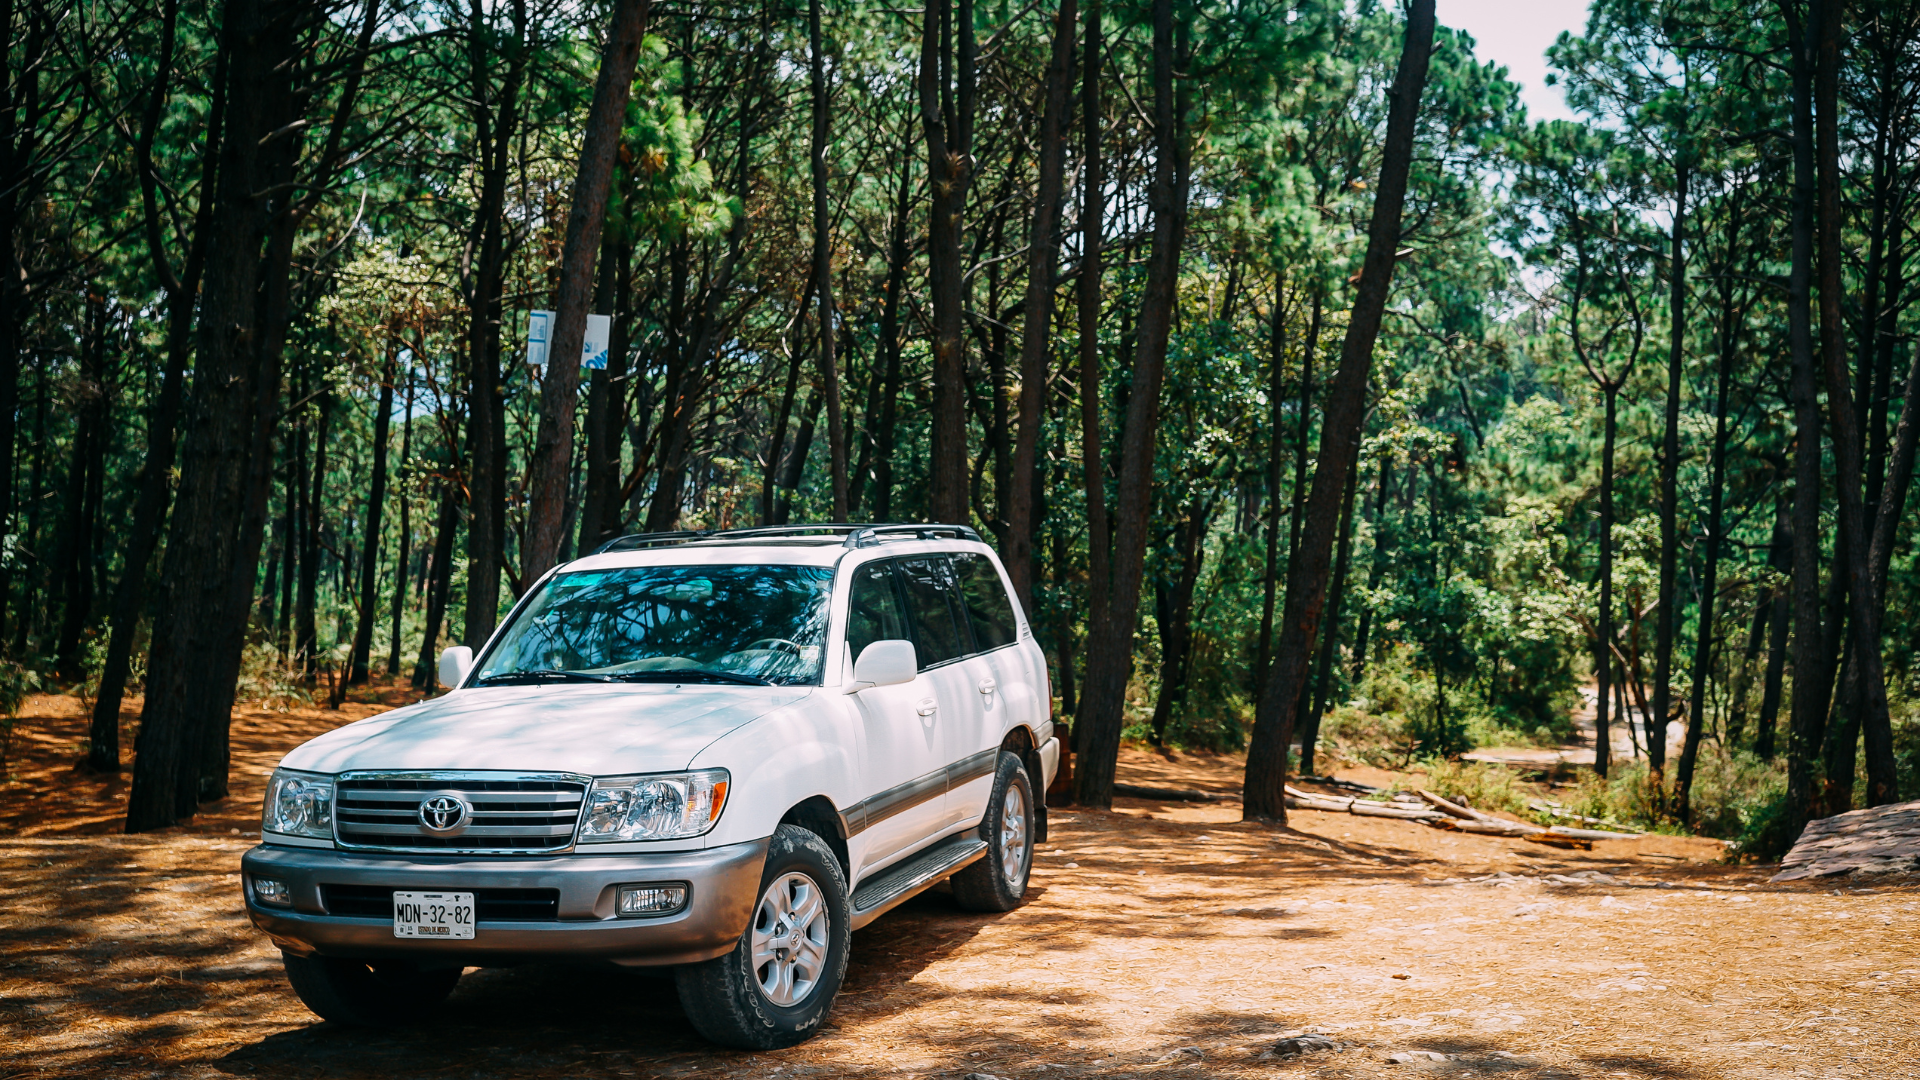 A Toyota Land Cruiser is one of the best cars for outdoor enthusiasts